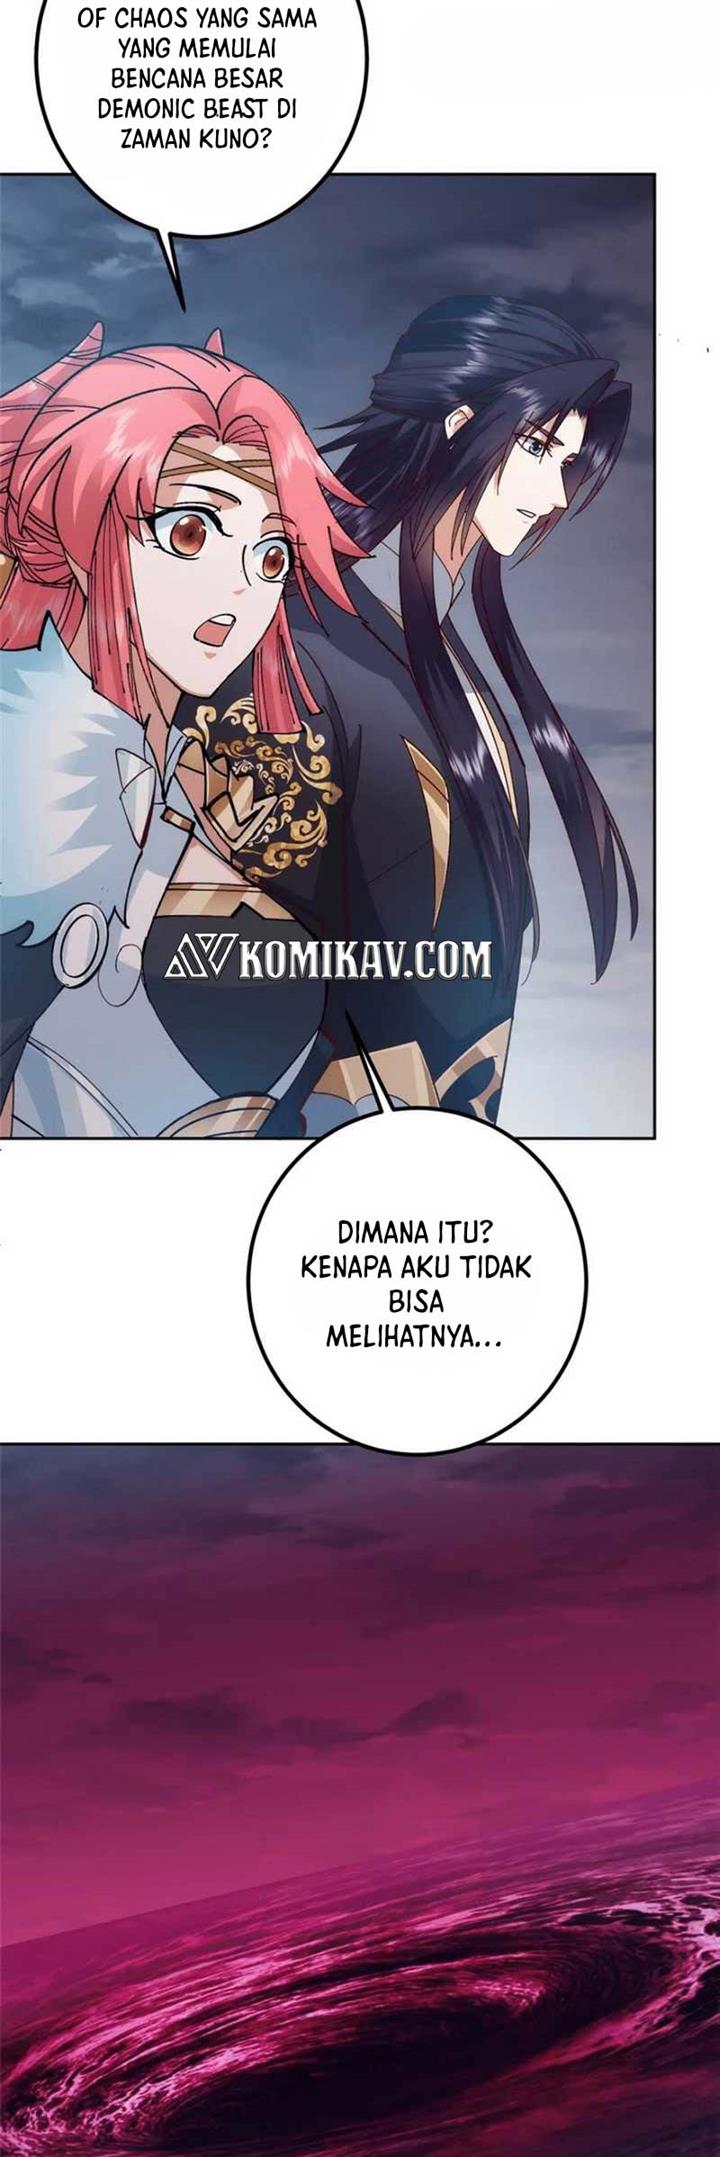 KomiknKeep A Low Profile, Sect Leader Chapter 275